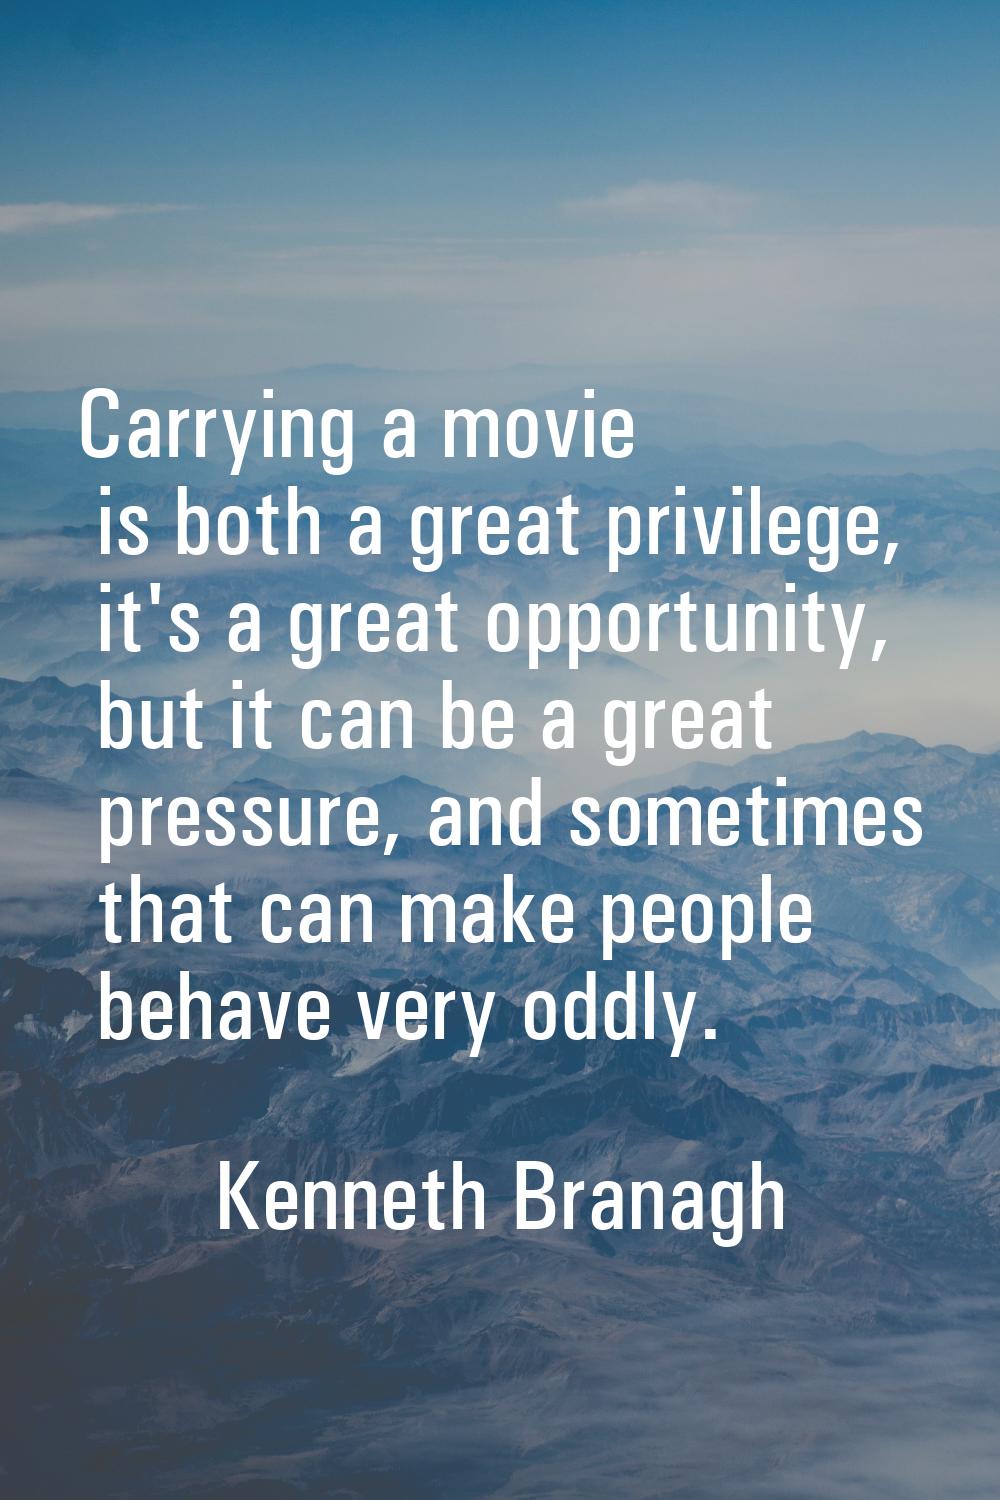 Carrying a movie is both a great privilege, it's a great opportunity, but it can be a great pressur